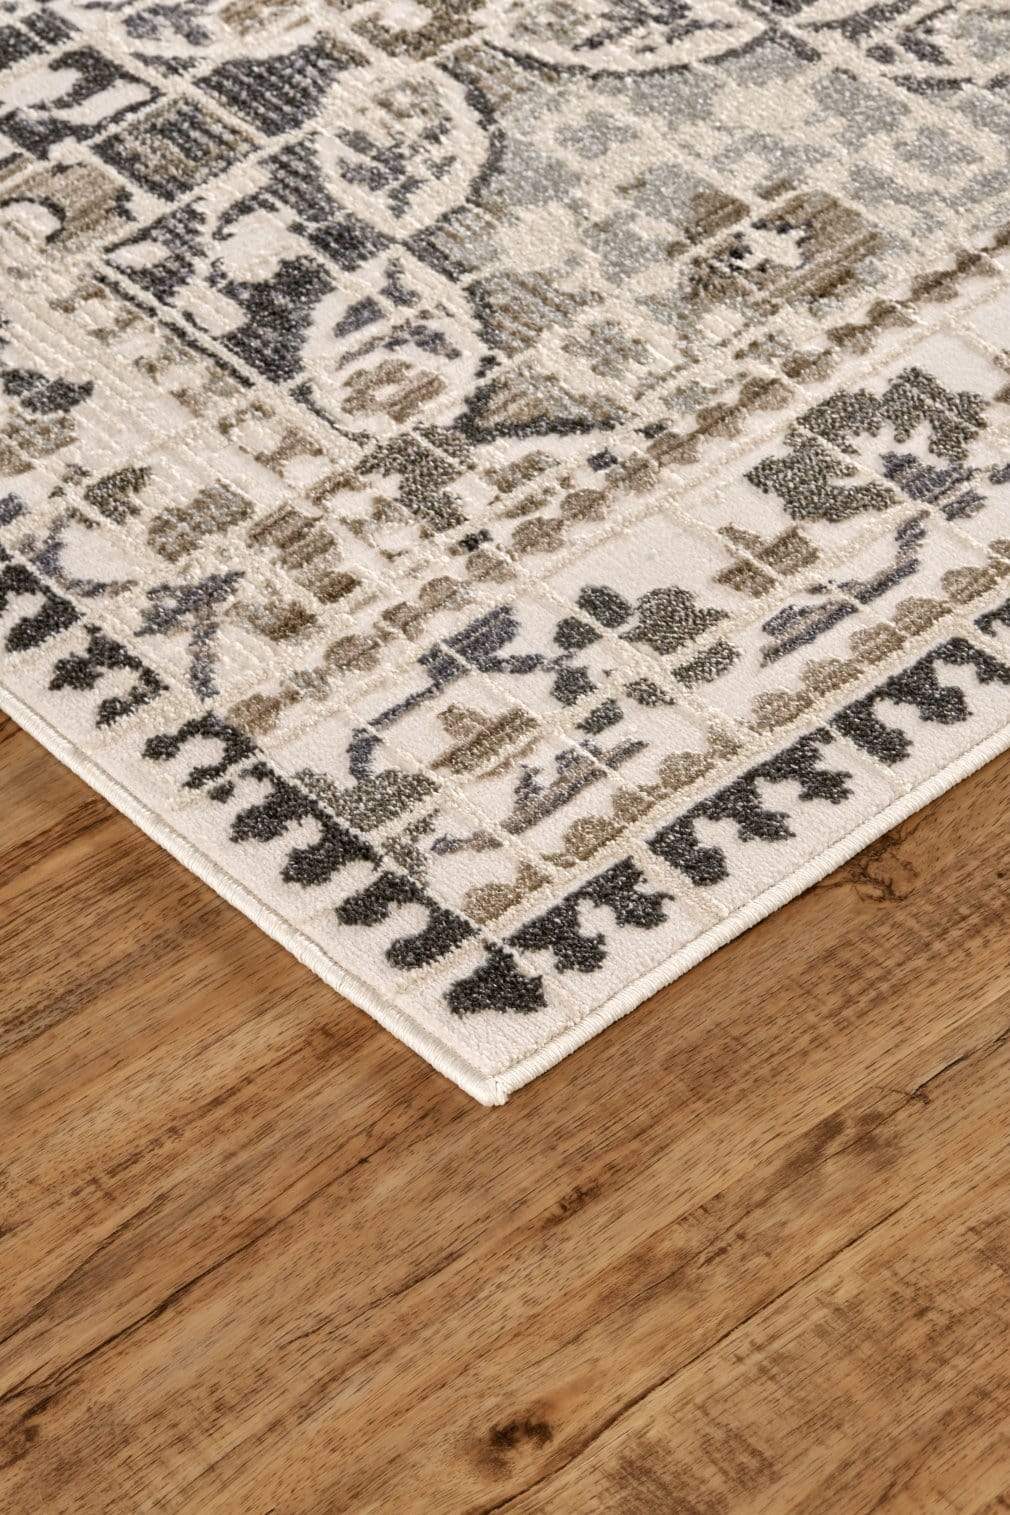 Feizy Feizy Kano Distressed Geometric Floral Rug - Gray & Ivory - Available in 8 Sizes